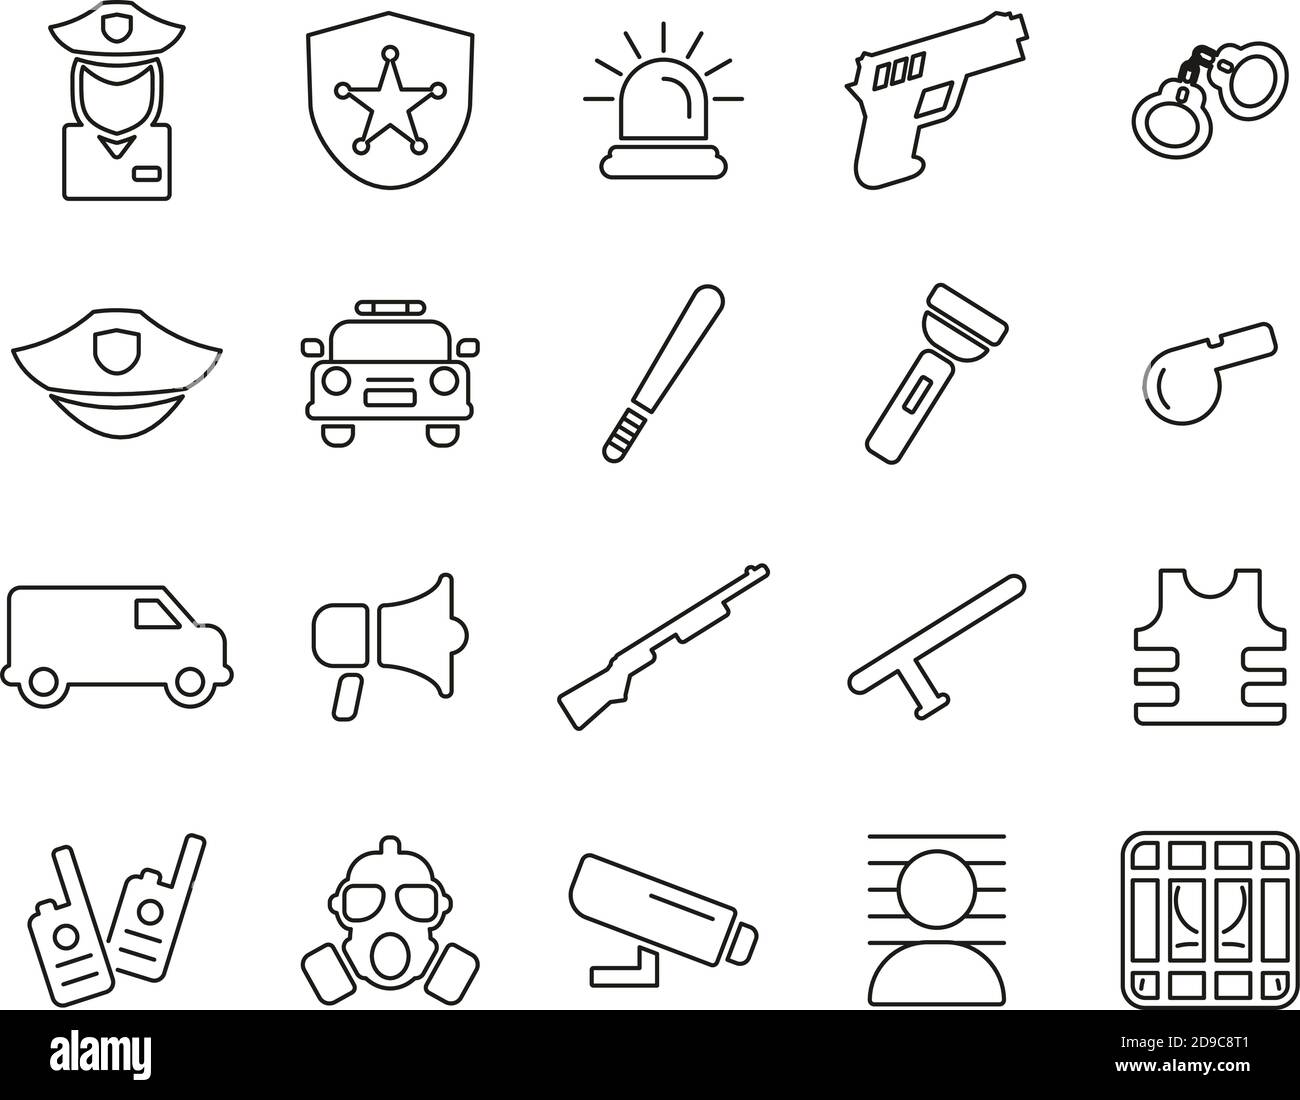 Police Or Police Force Icons Black & White Thin Line Set Big Stock Vector